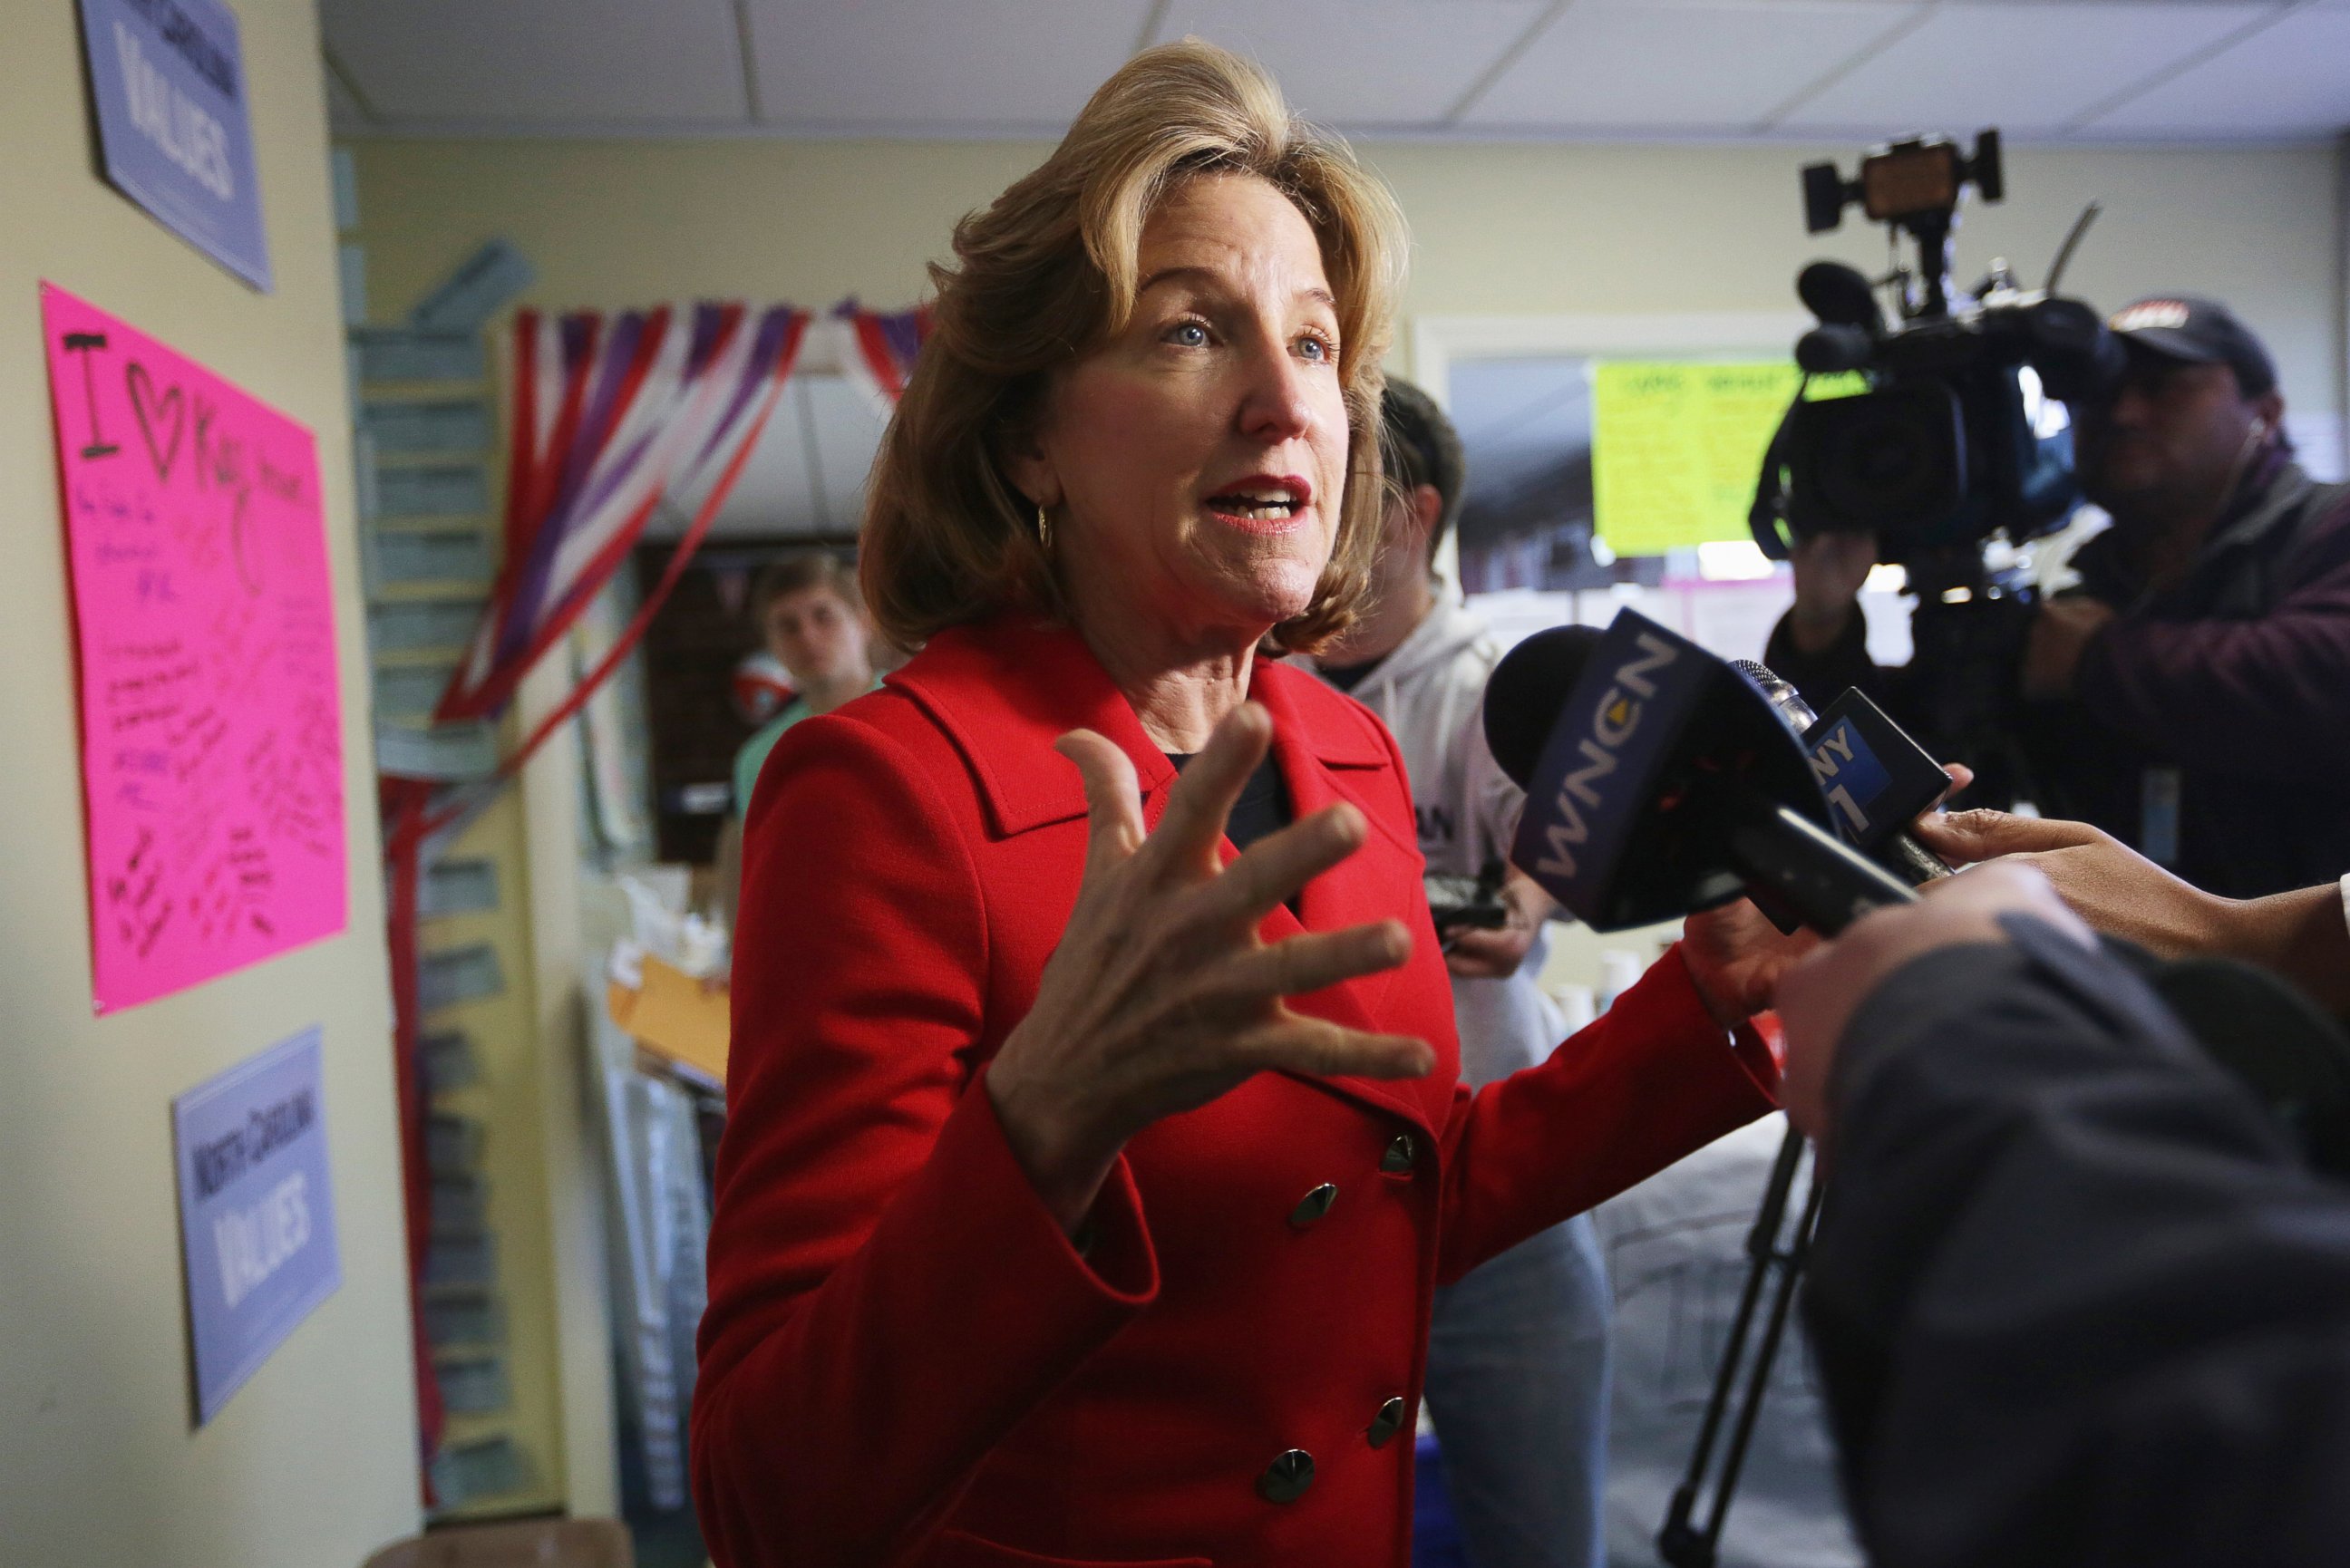 PHOTO: Incumbent U.S. Sen. Kay Hagan (D-NC) speaks to members of the media during a visit at her campaign office Nov. 3, 2014 in Cary, N.C.  